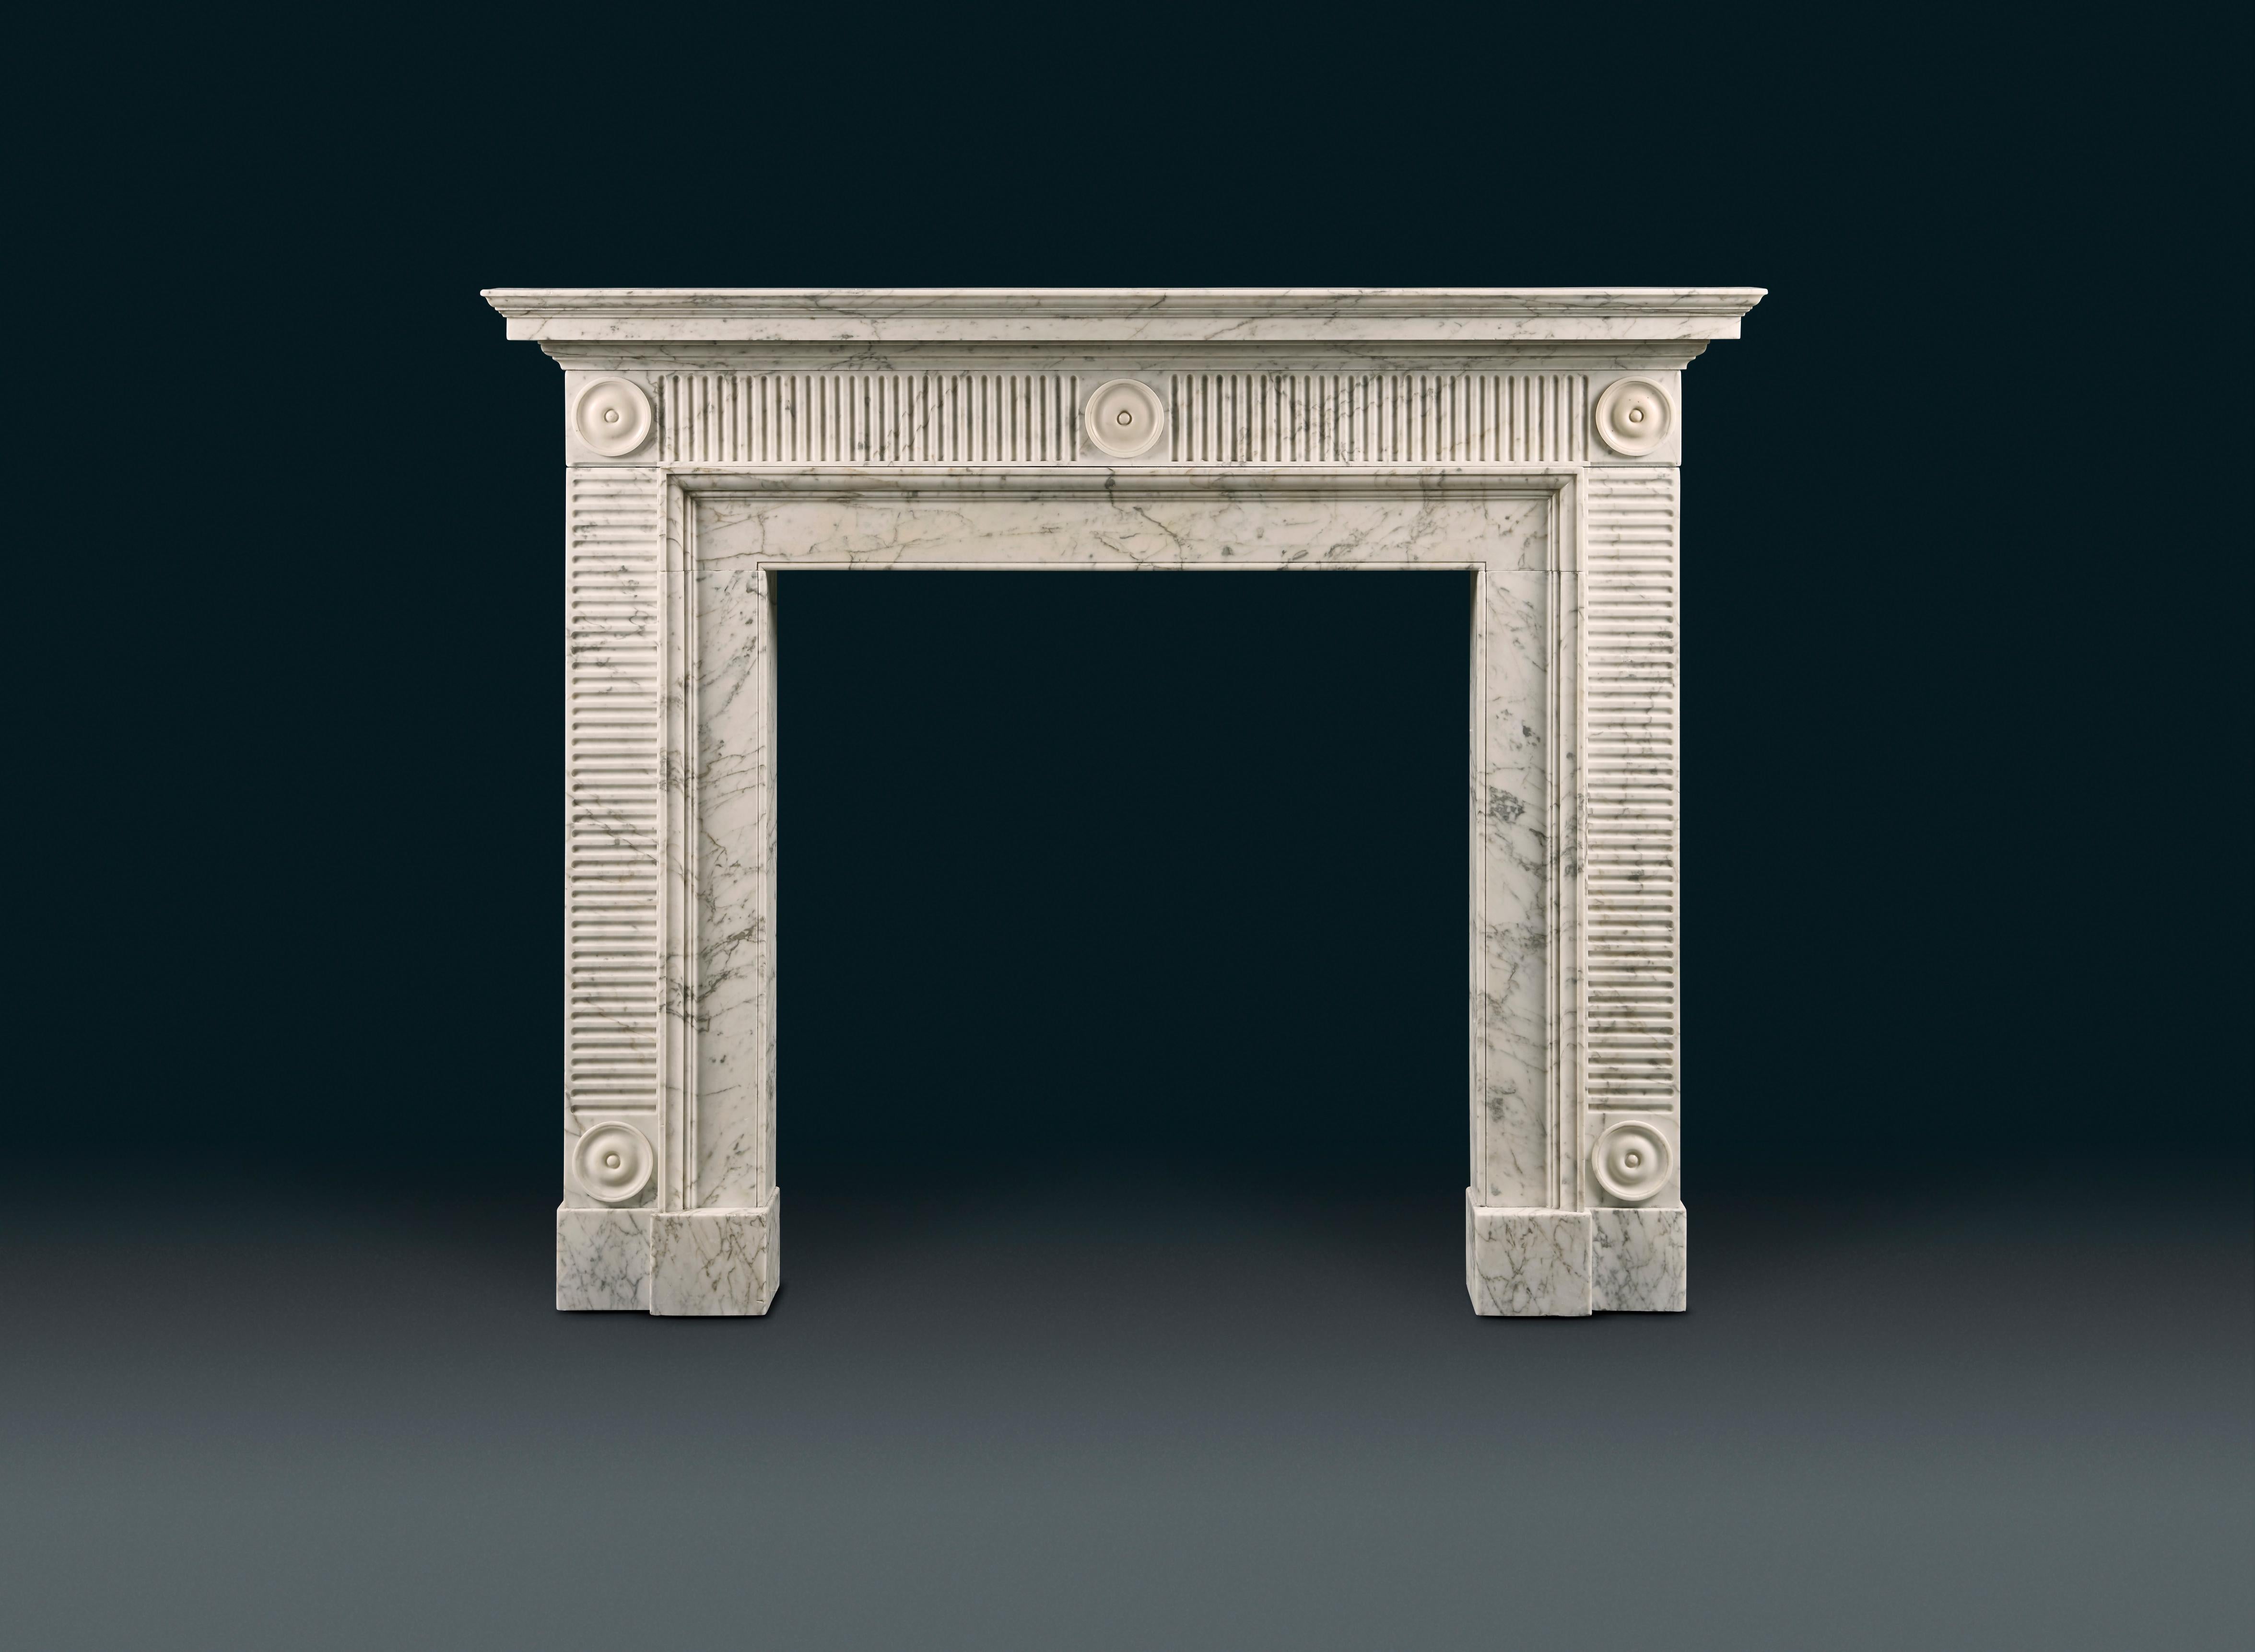 An elegant late 18th century Carrara and white statuary marble chimneypiece in the manner of Sir John Soane. Once installed in the famous Waldorf Astoria Hotel in Manhattan. With a tiered and moulded shelf, the frieze and jambs with horizontal and